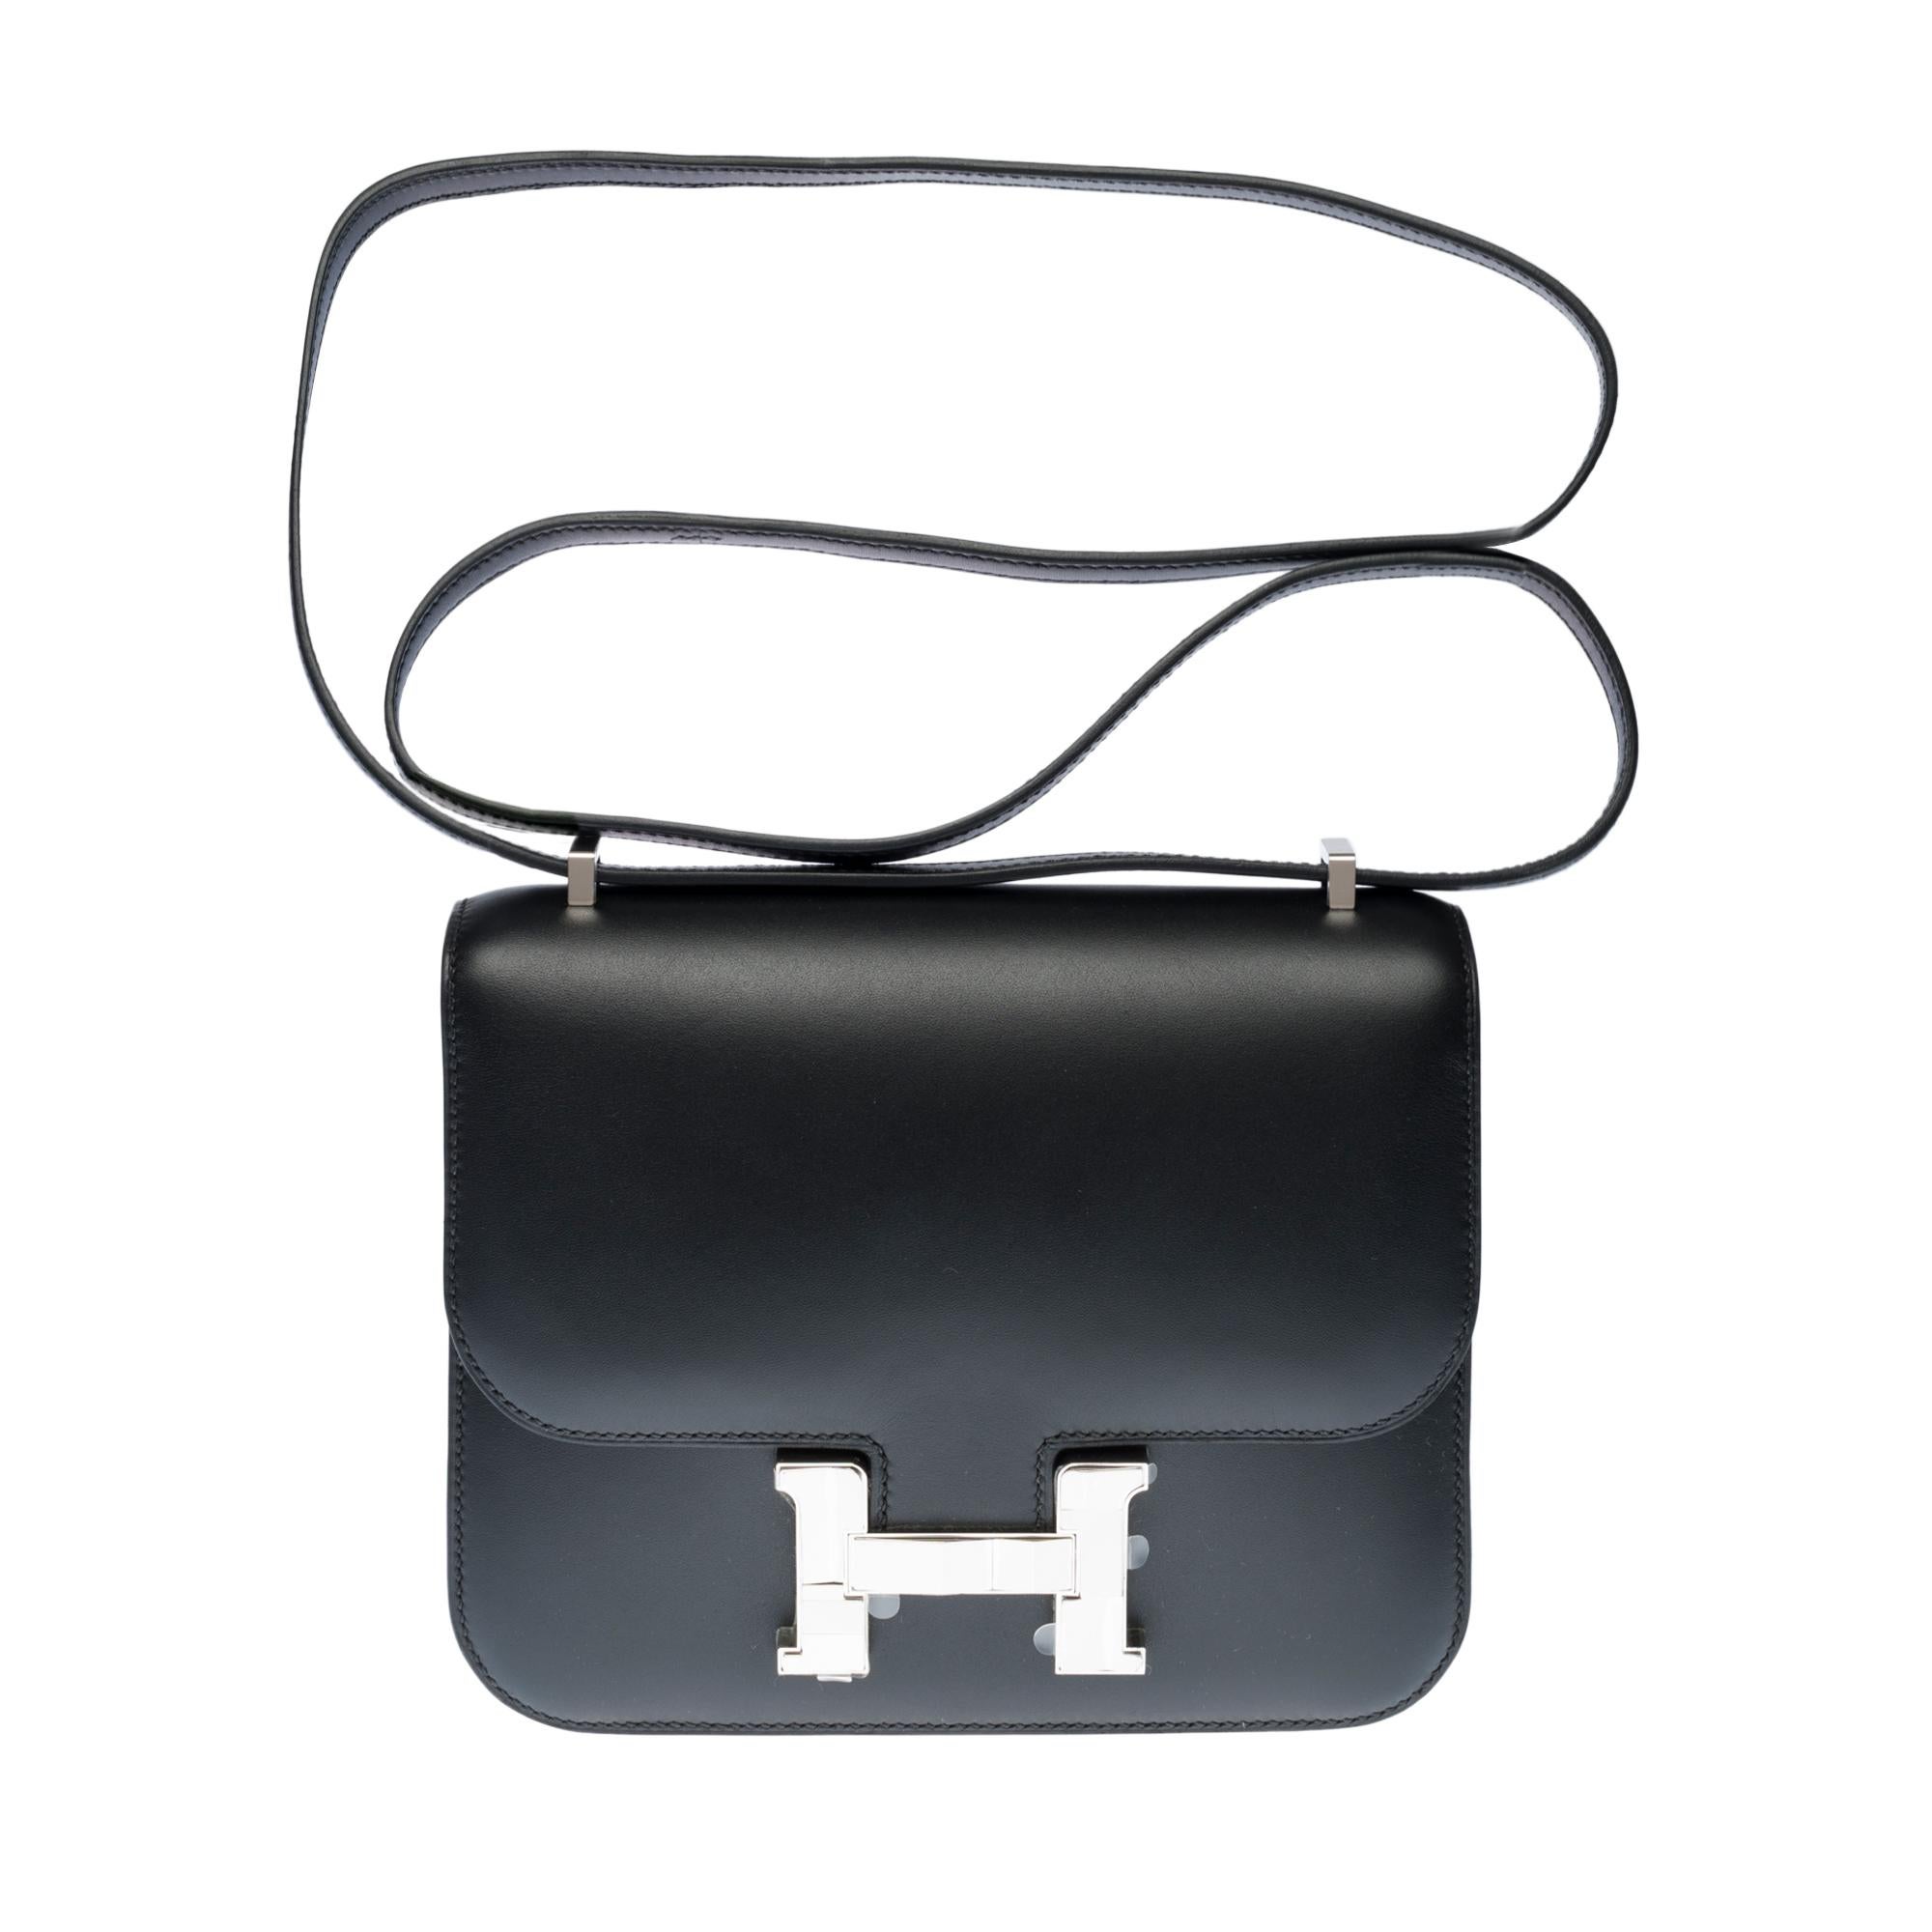 Splendid and Rare Hermès Constance Mini 18 shoulder bag, Studio limited edition in black Monsieur leather, 3D mirror buckle, palladium silver metal hardware, a shoulder strap in black Monsieur leather allowing a shoulder or in crossbody

Logo